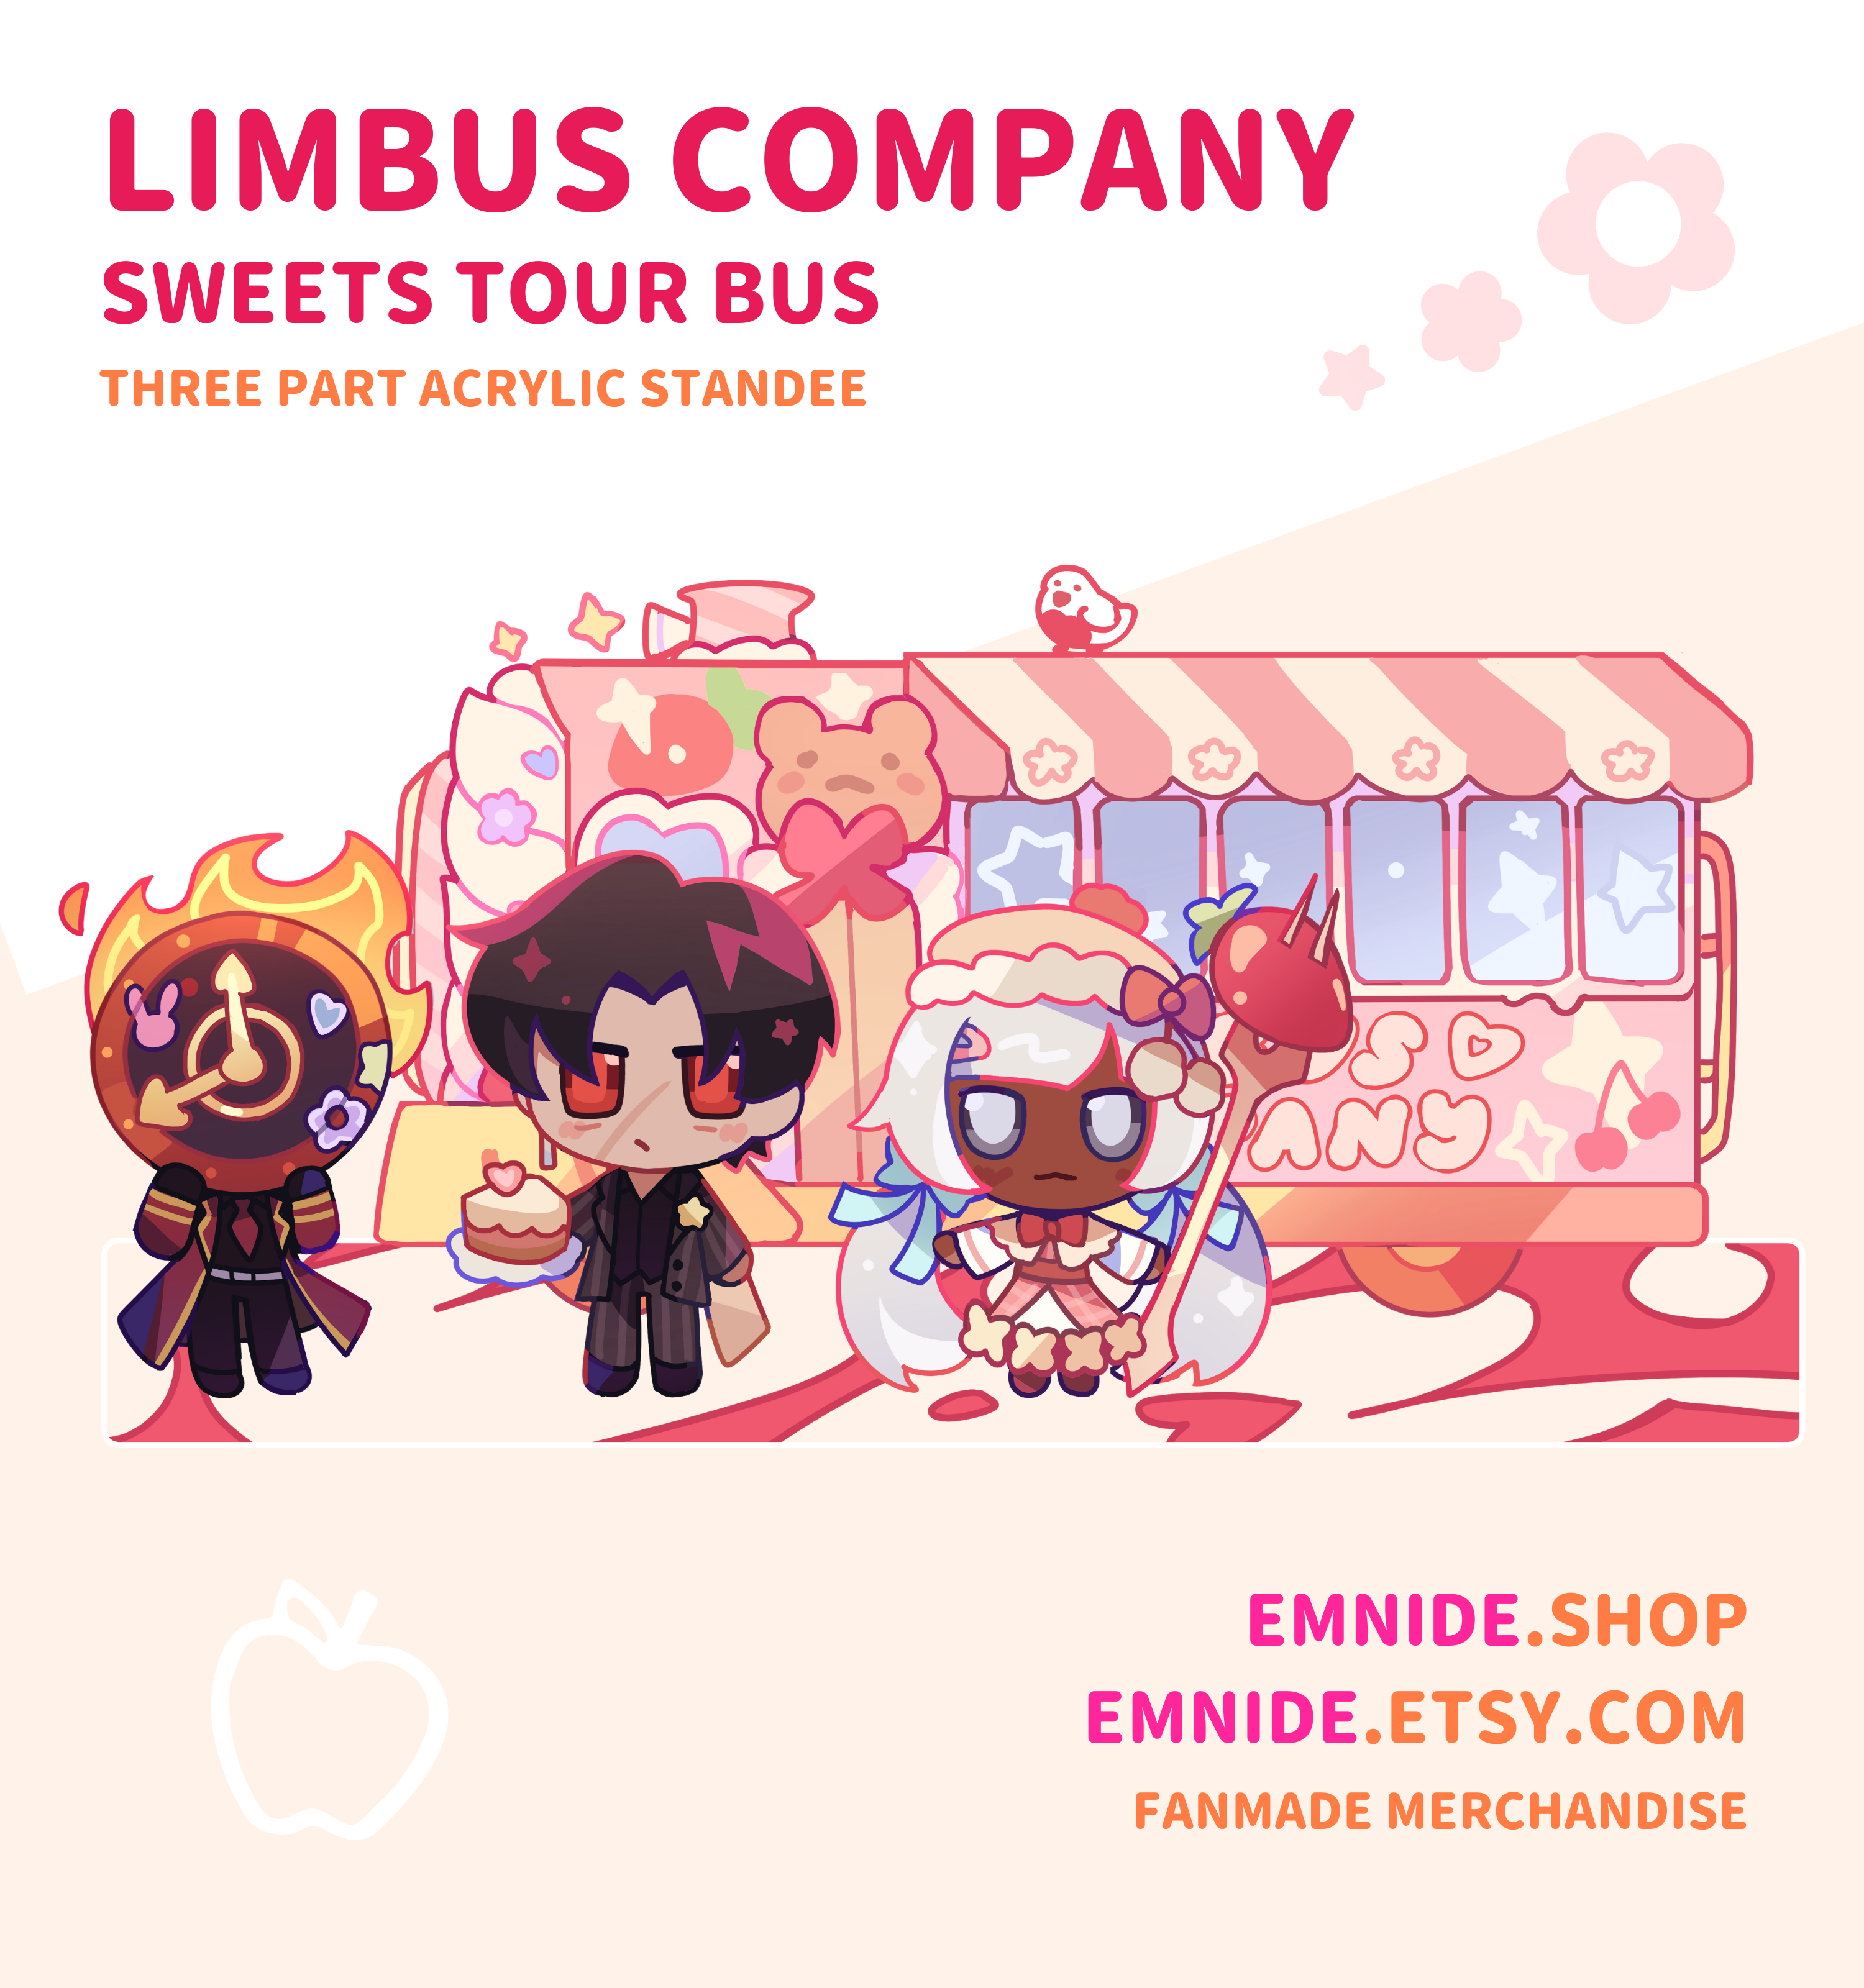 Sweets Tour Bus Standee ✧ Limbus Company ⁕ Strawberry and Cream